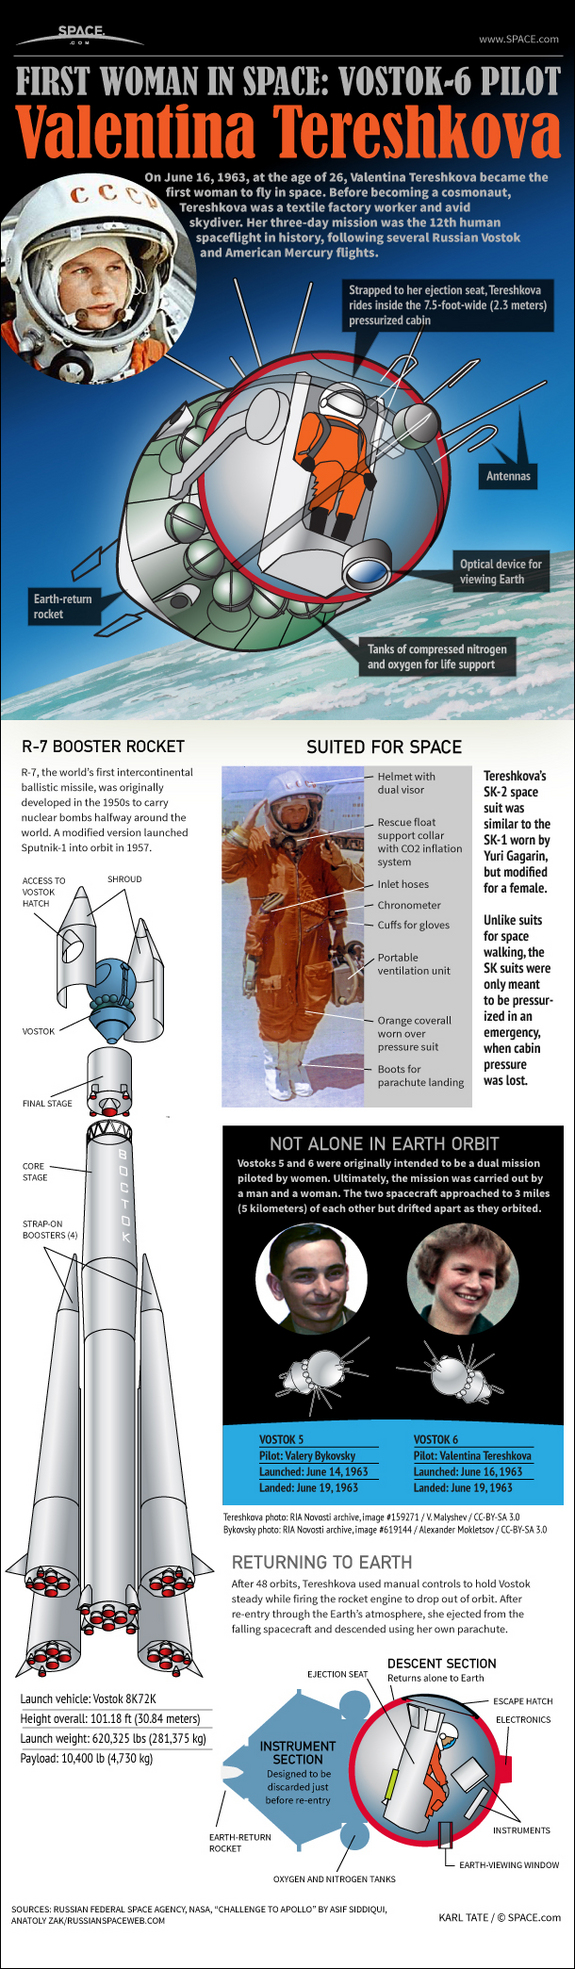 Find out how Valentina Tereshkova's historic Vostok-6 flight worked in this SPACE.com infographic.